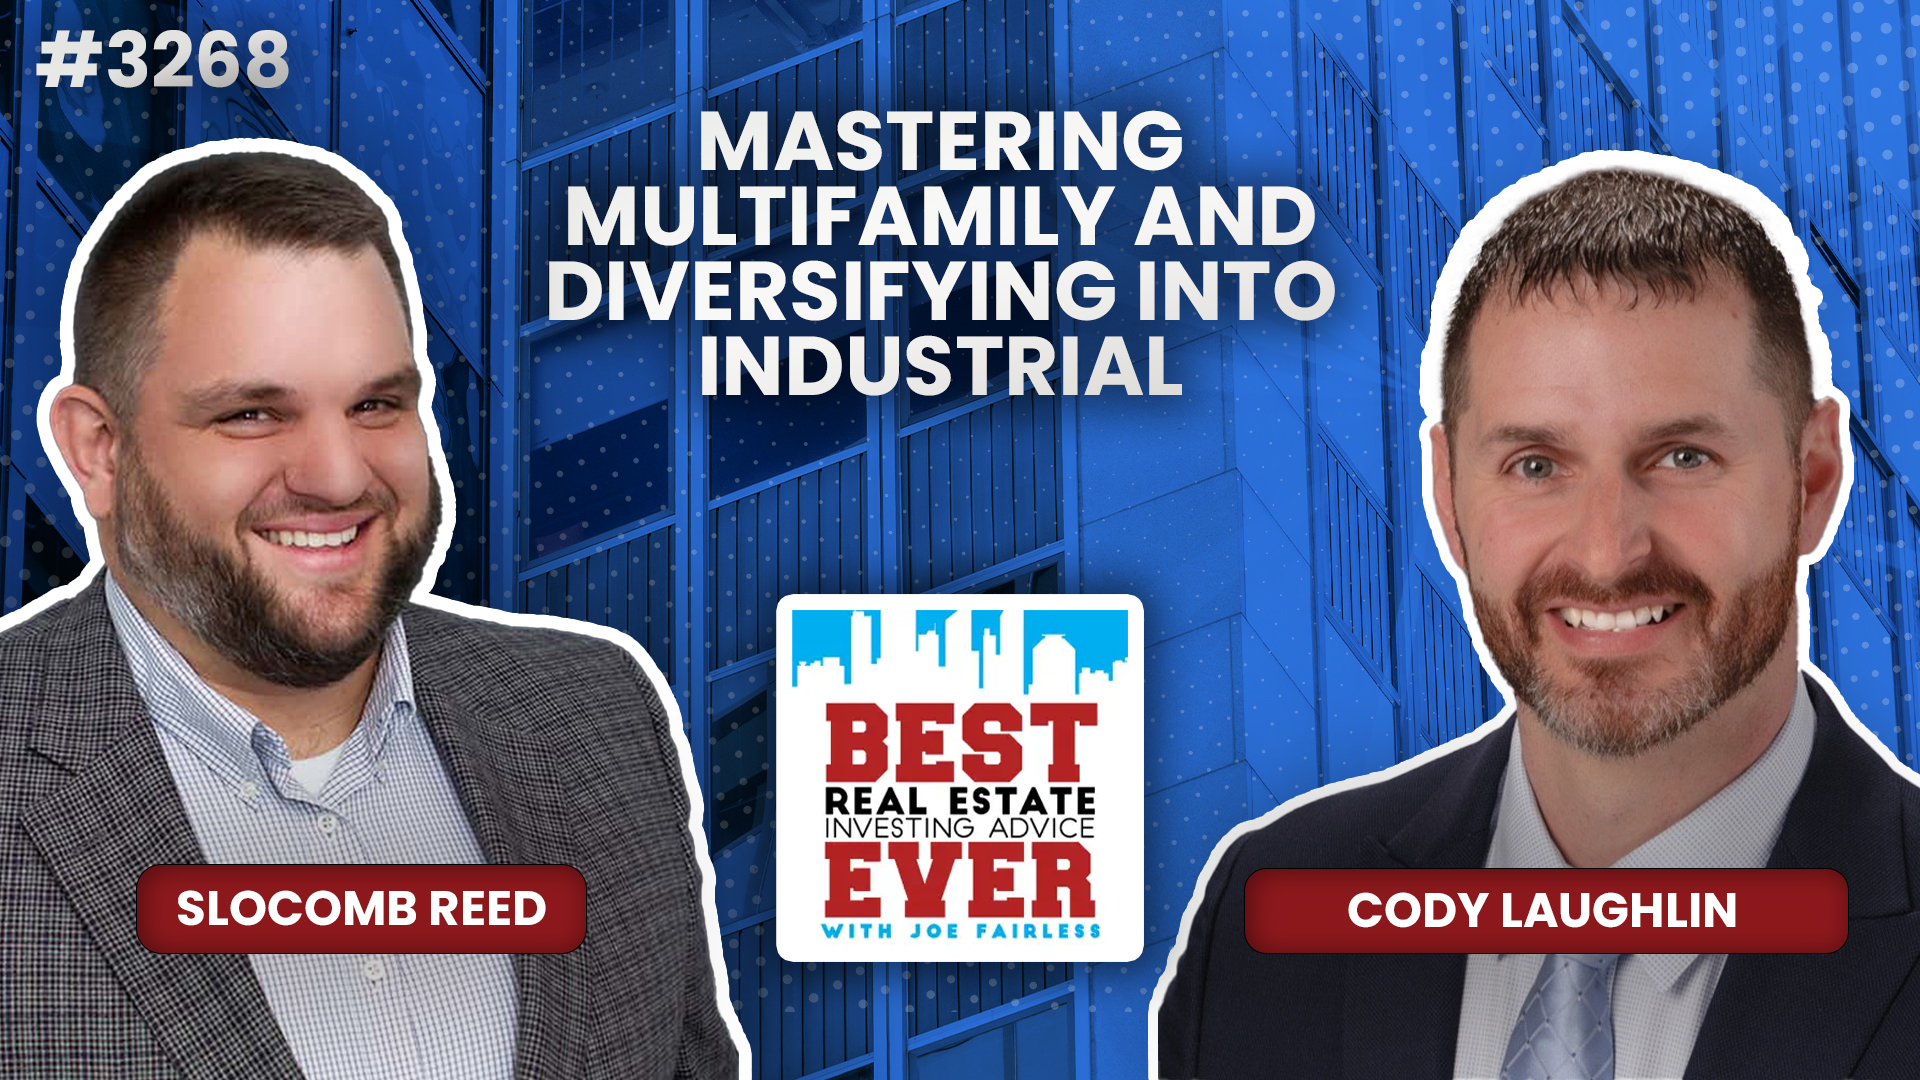 JF3268: Cody Laughlin — Mastering Multifamily and Diversifying Into Industrial